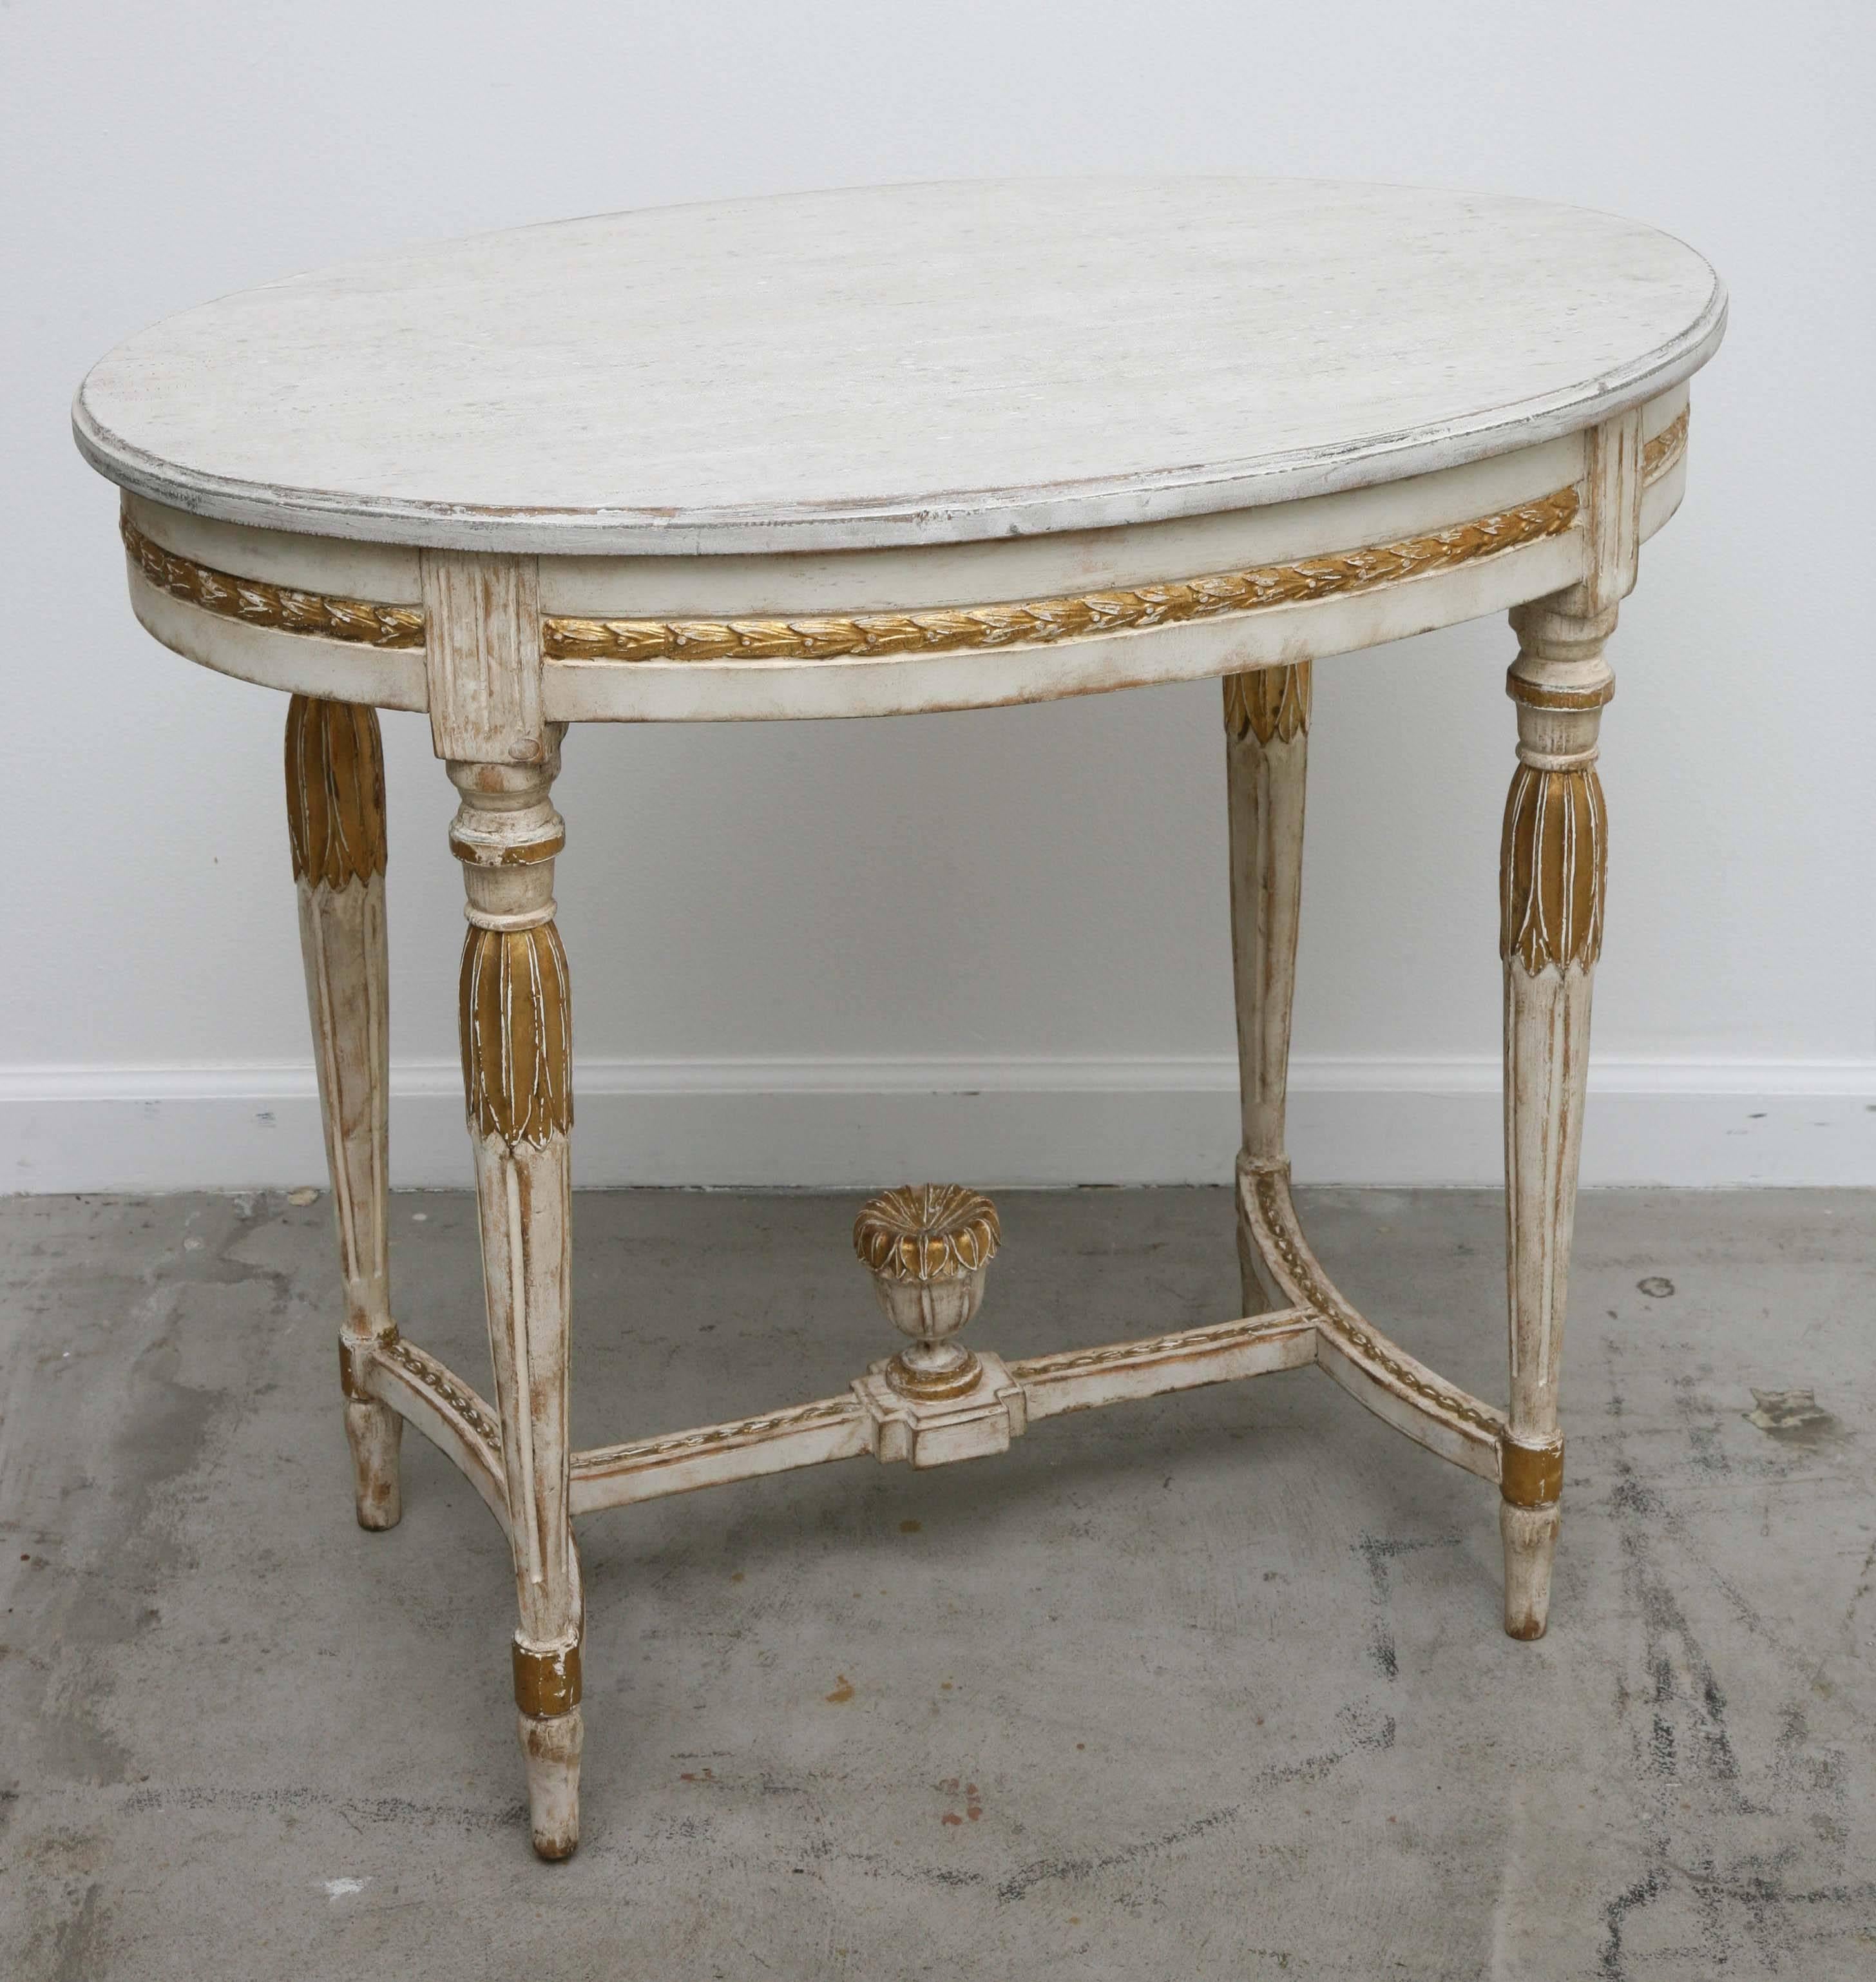 Antique Swedish Period Oval Table, Painted and Gilt Finish, 19th Century 1